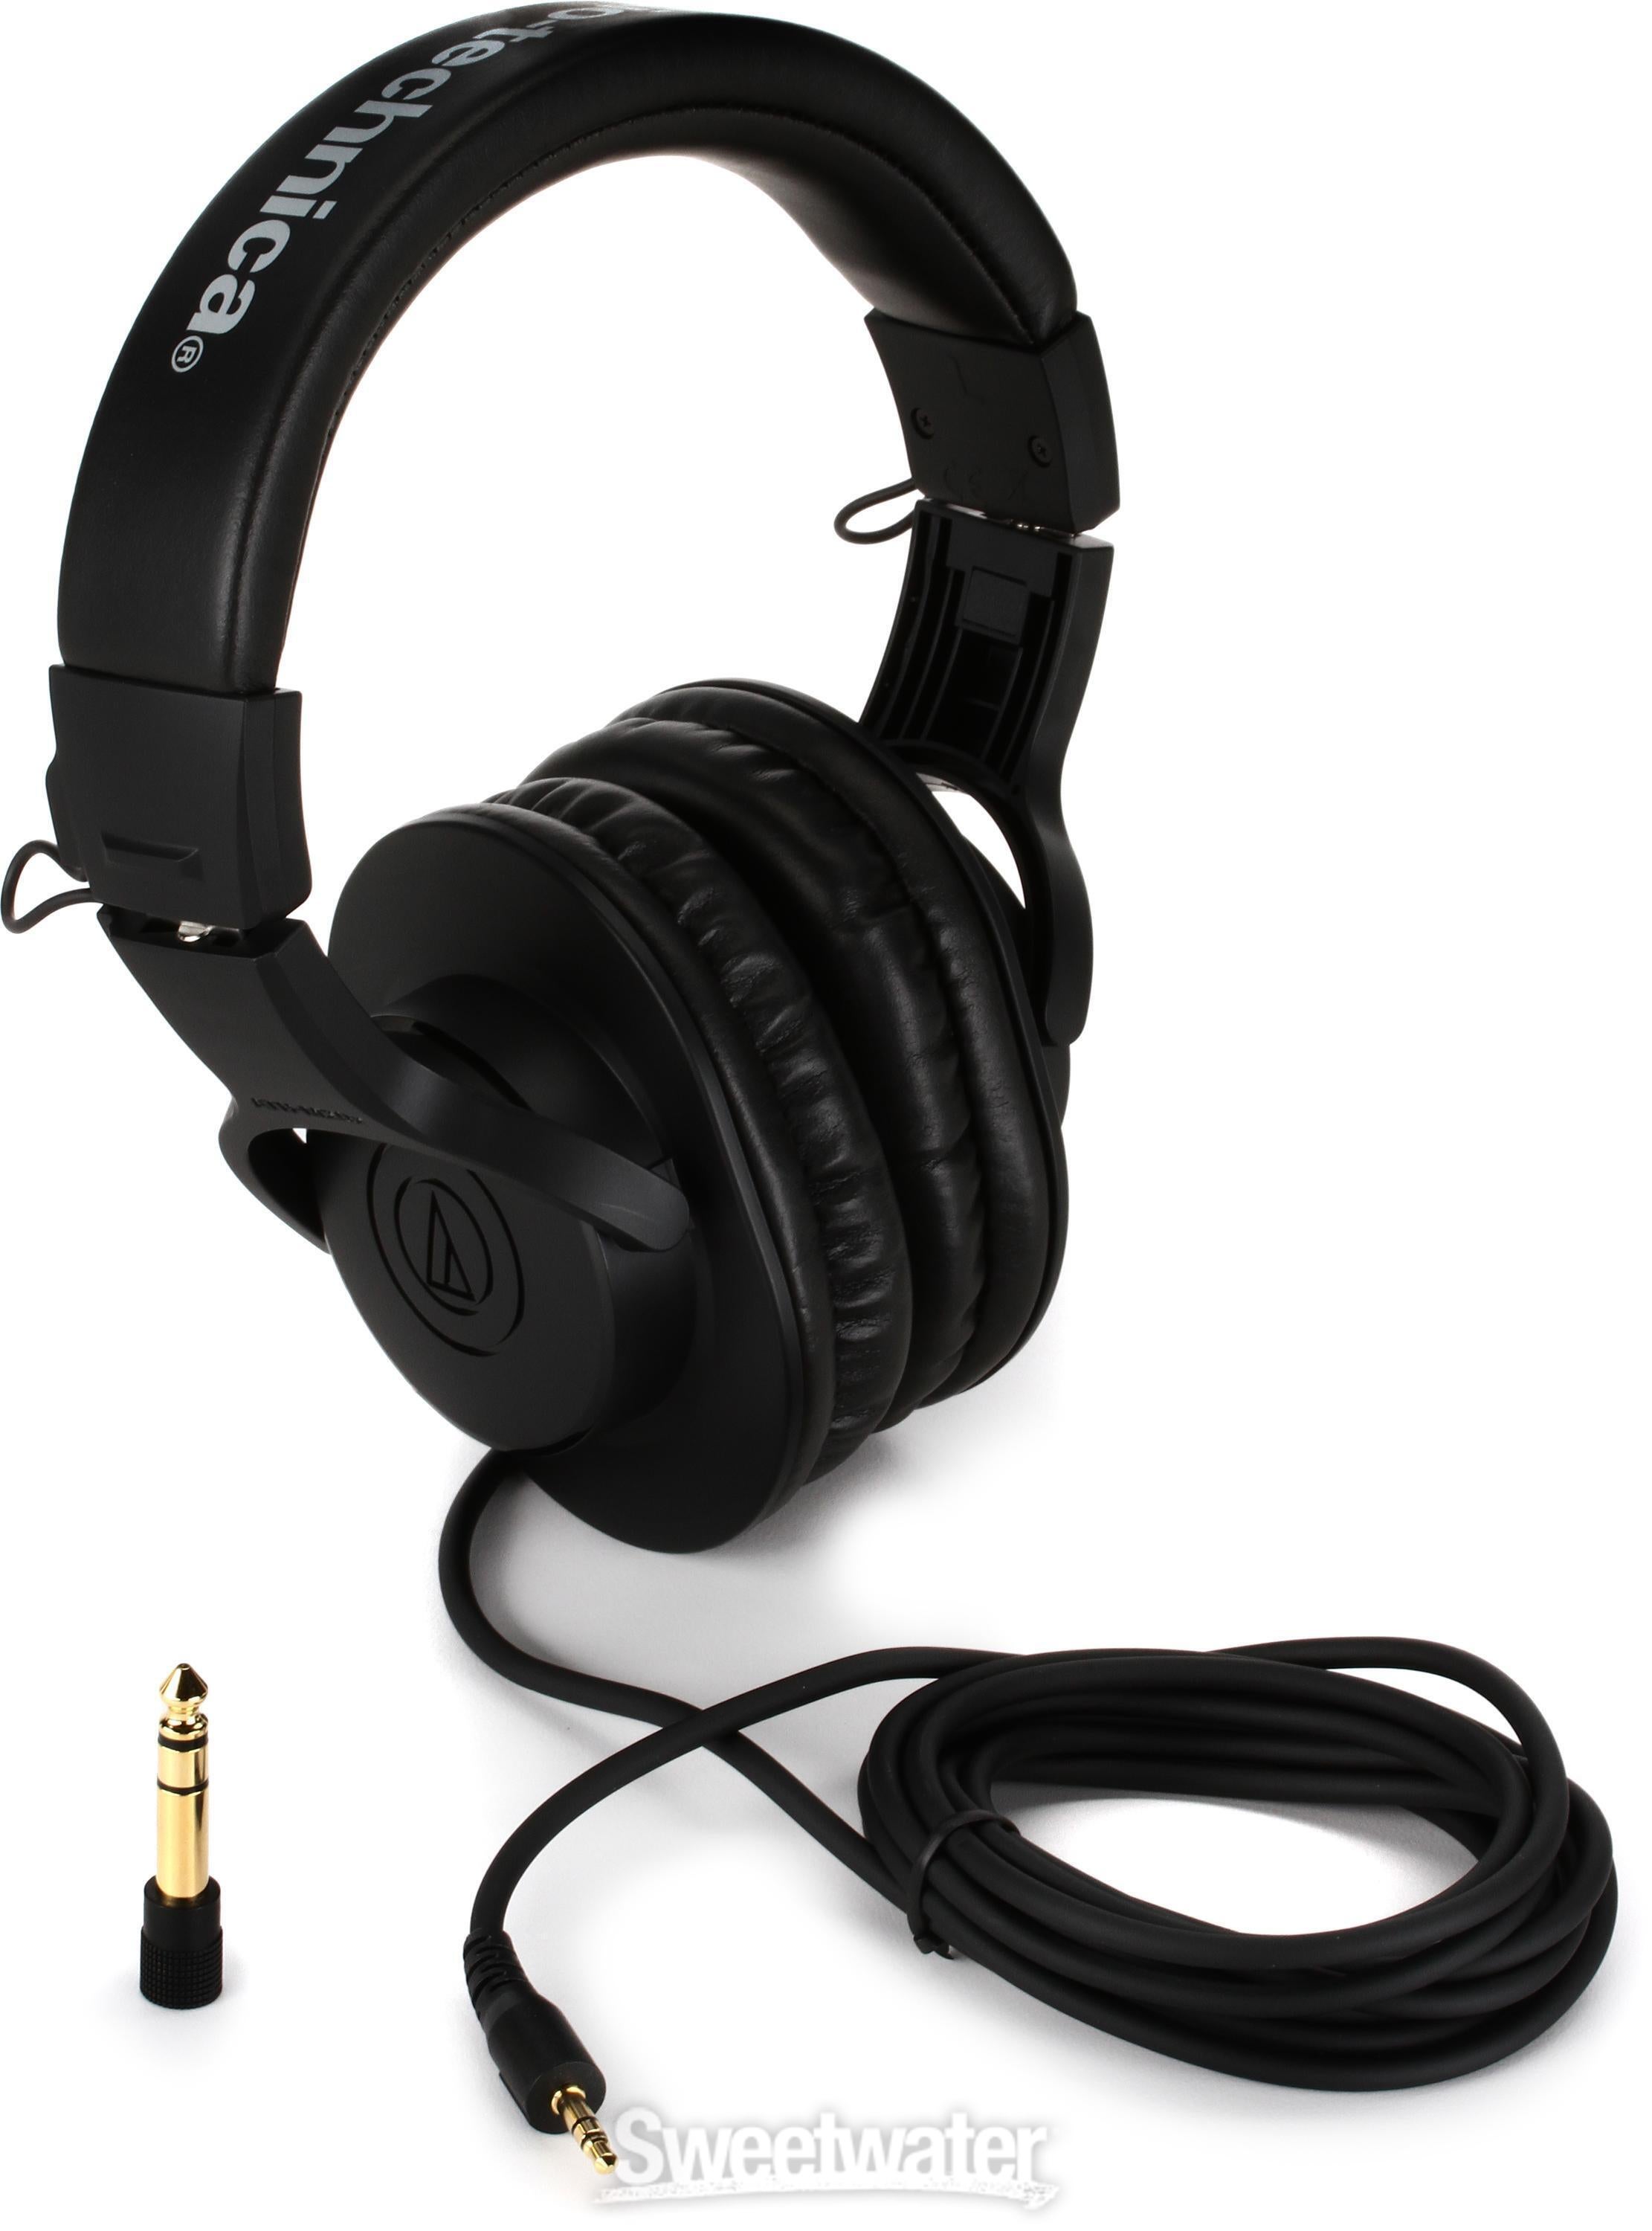 Audio-Technica ATH-M20x Closed-back Monitoring Headphones | Sweetwater